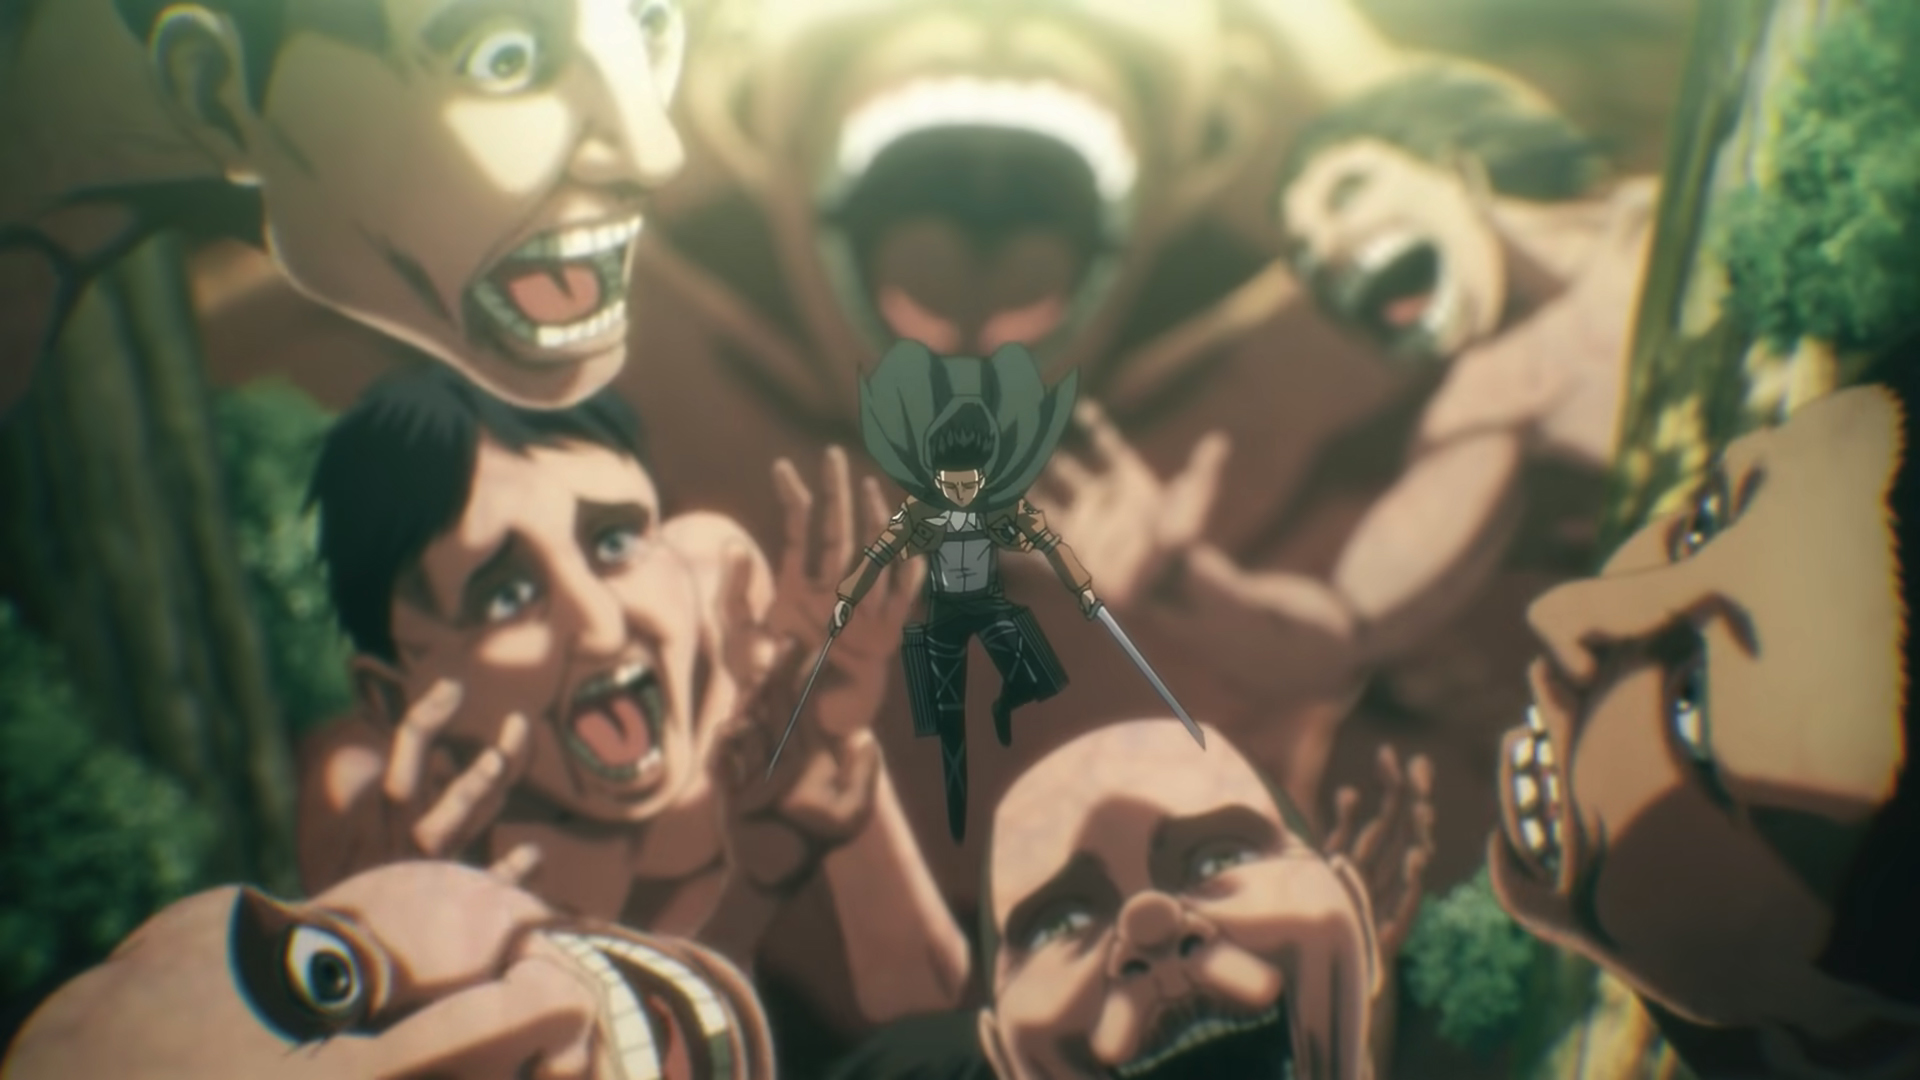 Attack on Titan season 4: what you need to know about the hit anime